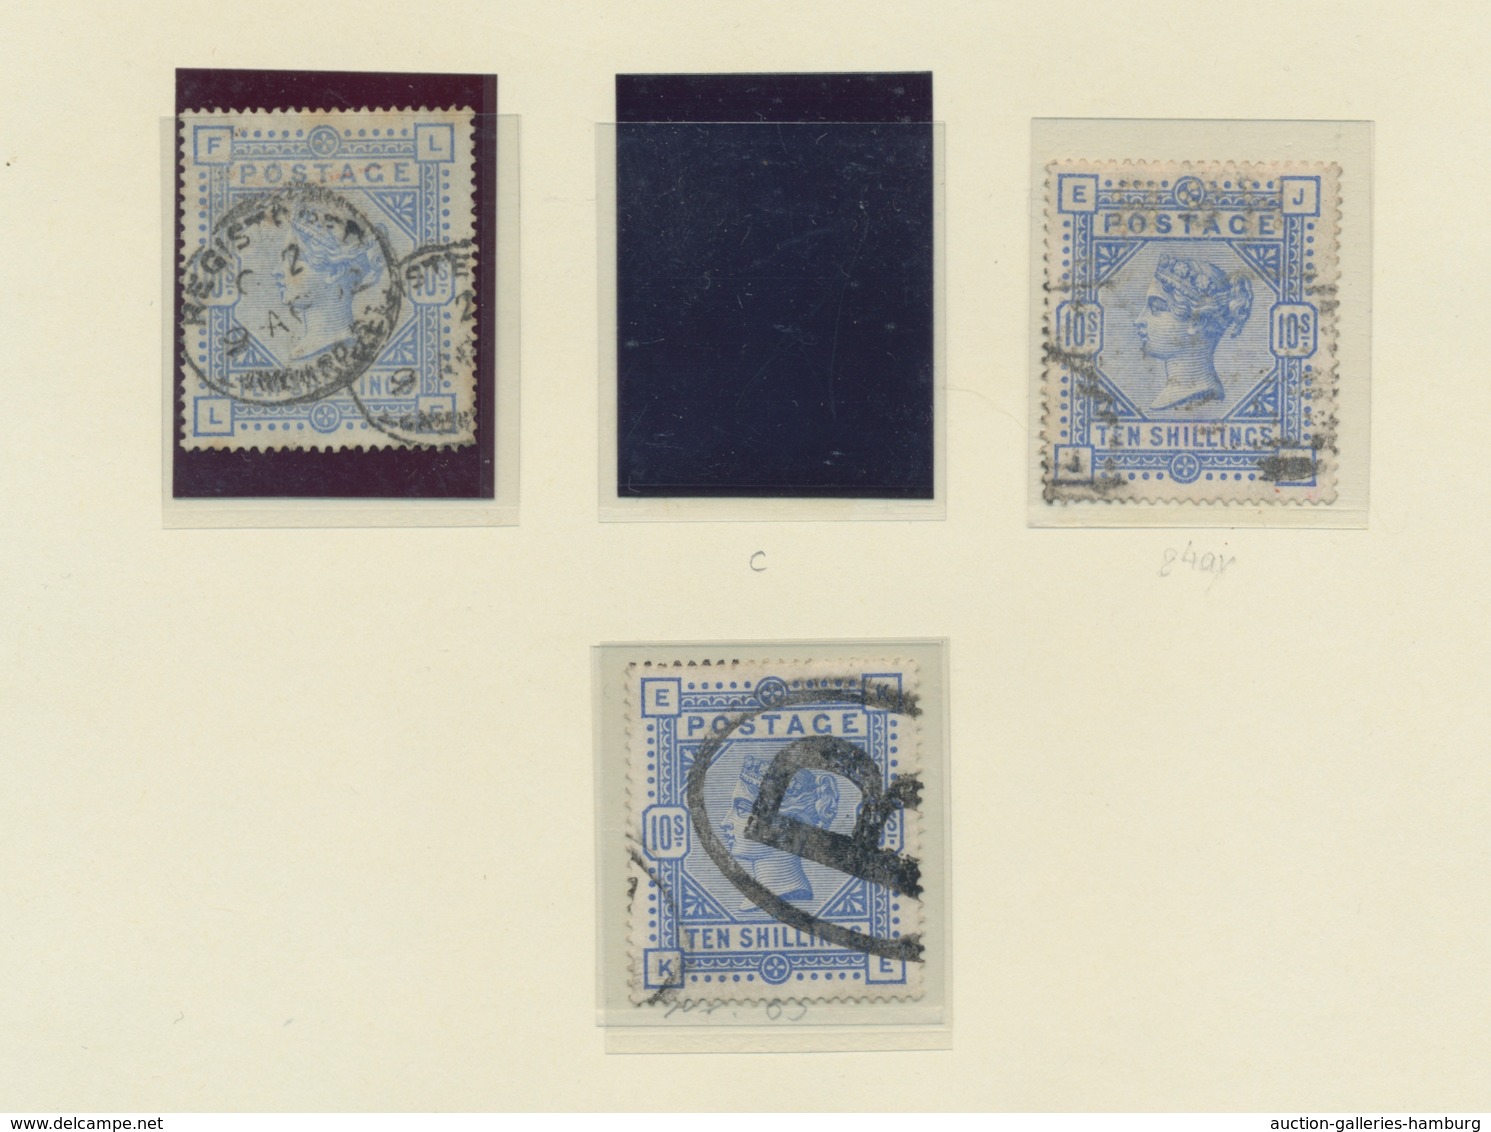 Großbritannien: 1840-1900, exceedingly rich, used specialized collection of the "Queen Victoria" iss